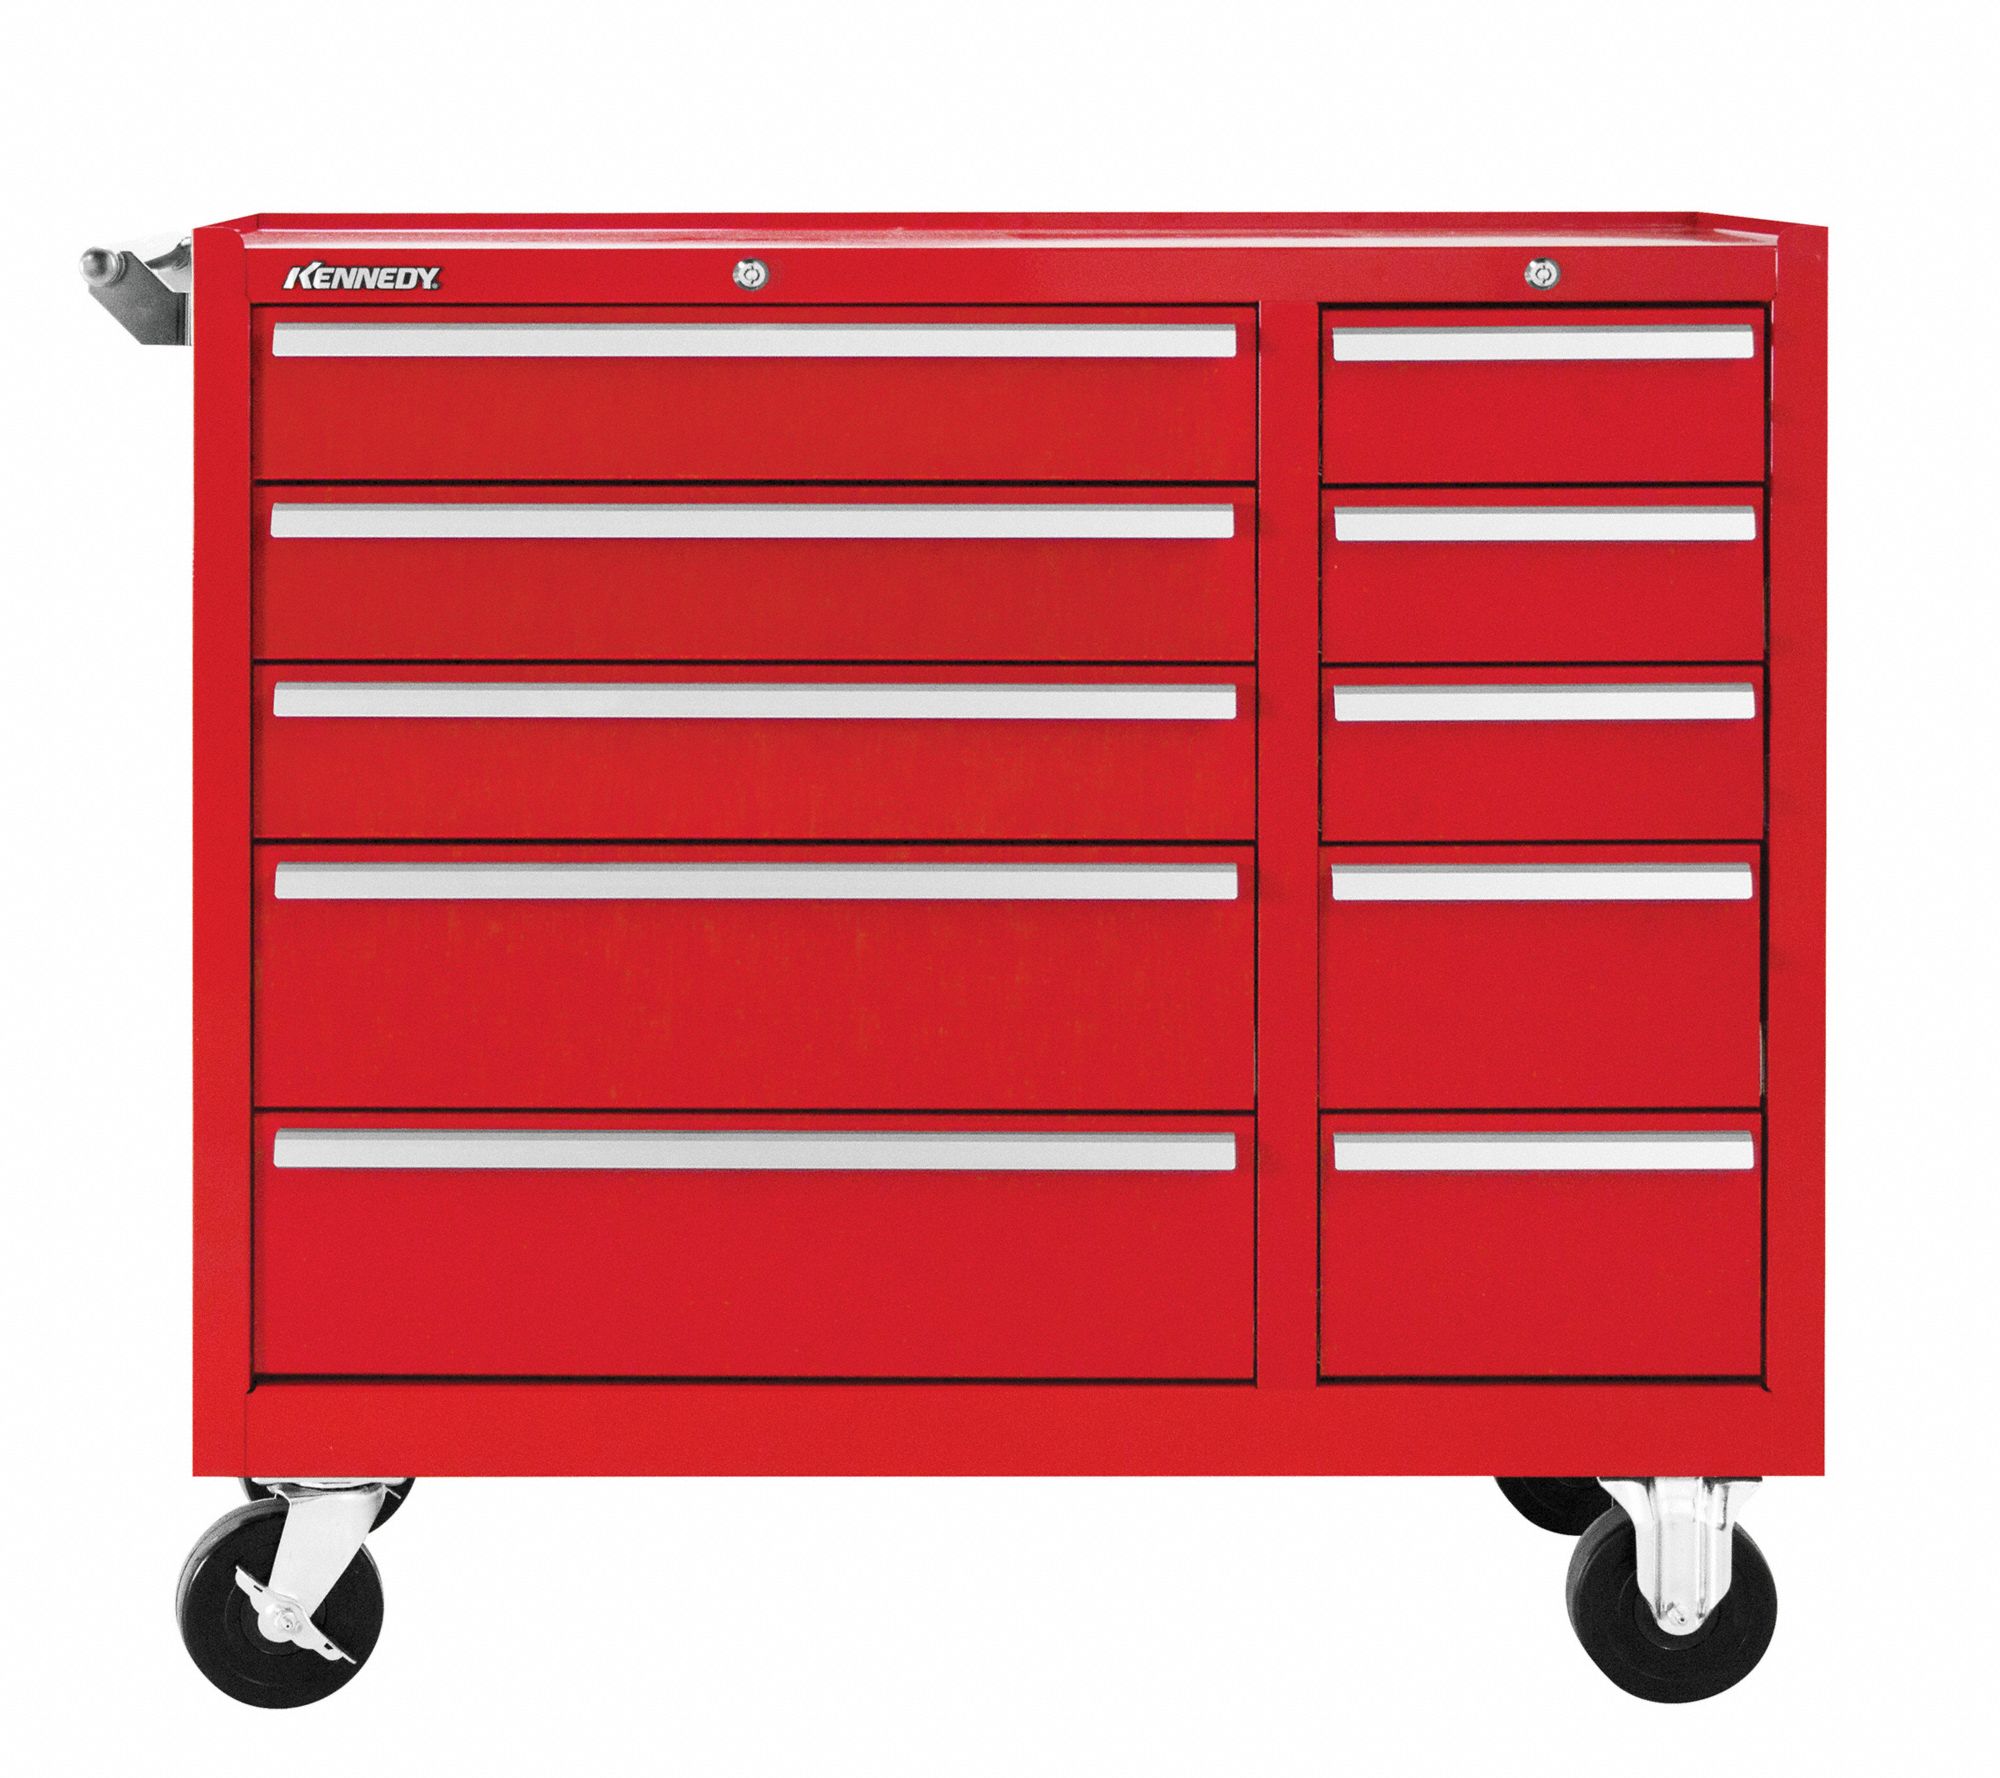 WESTWARD, Gloss Red, 26 3/4 in W x 18 15/16 in D x 39 1/2 in H, Rolling  Tool Cabinet - 32H888